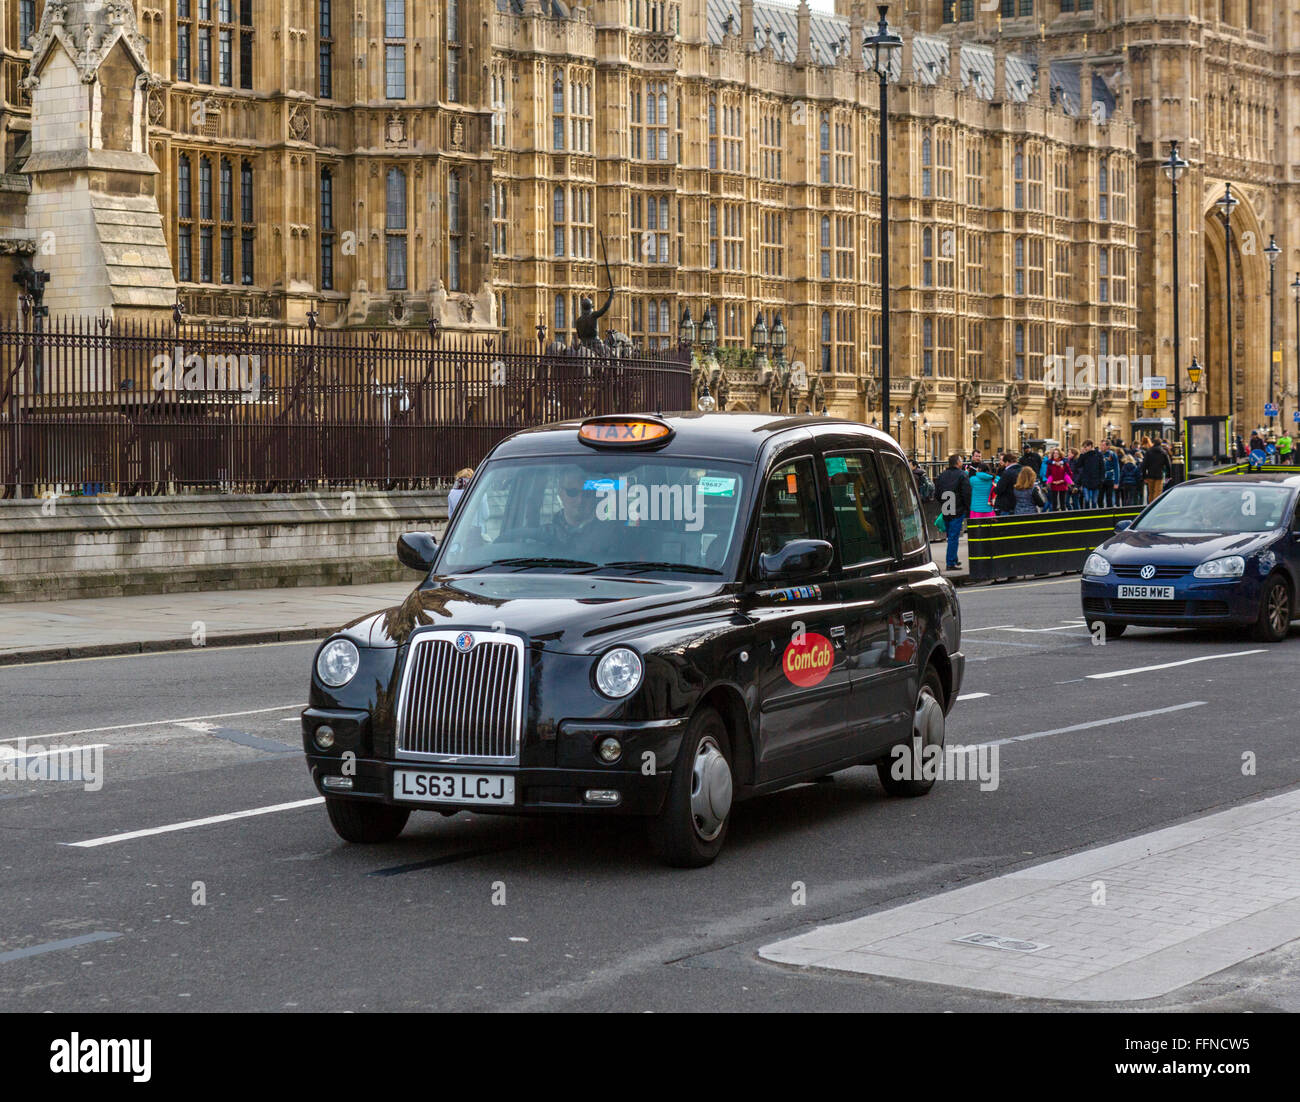 Schwarzes Taxi vor den Houses of Parliament (Palace of Westminster), Westminster, London, England, UK Stockfoto